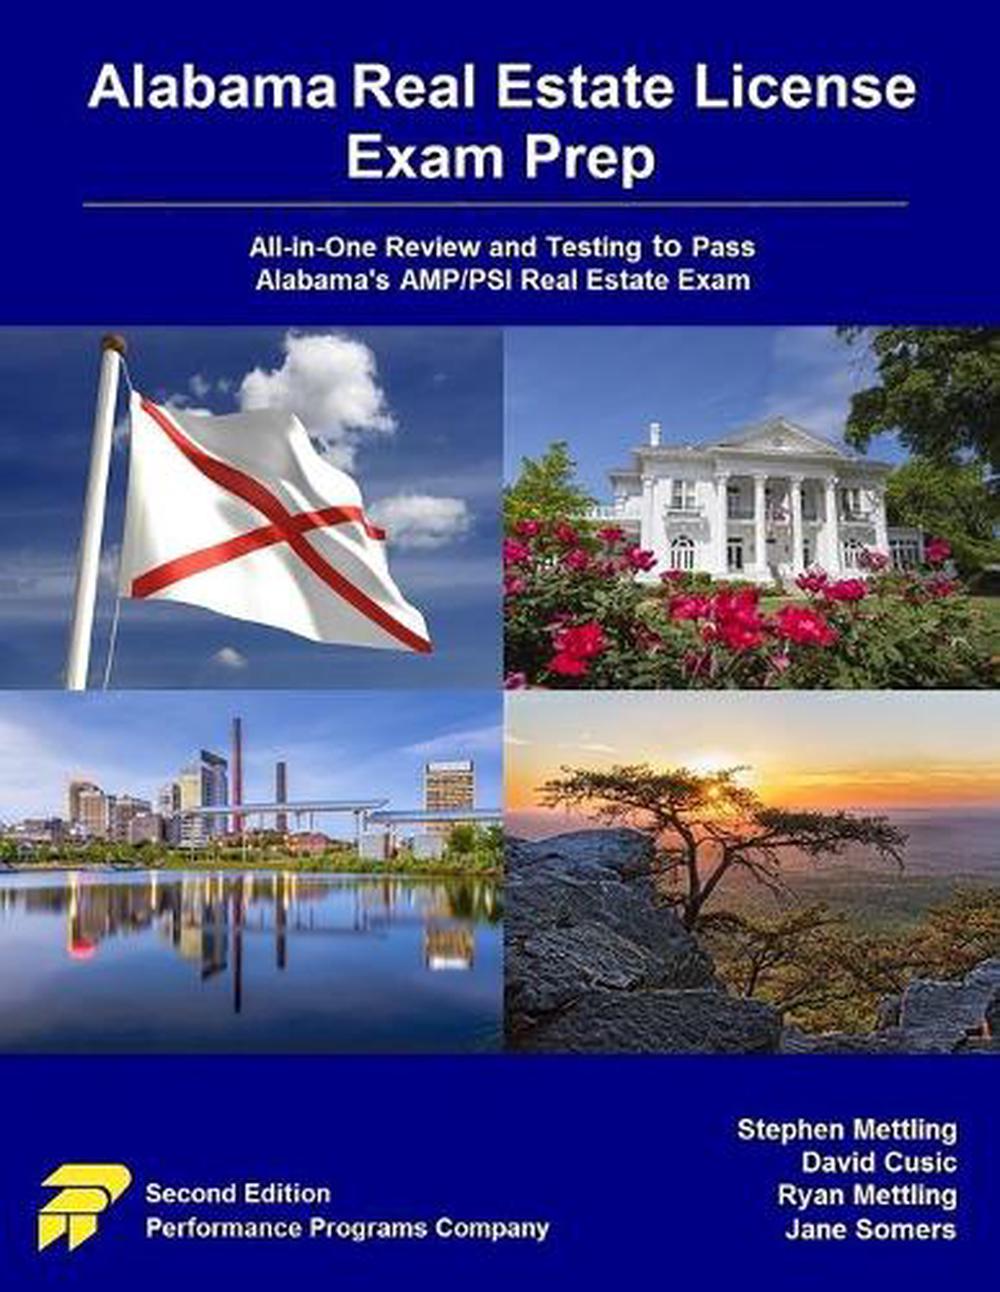 alabama-real-estate-license-exam-prep-all-in-one-review-and-testing-to